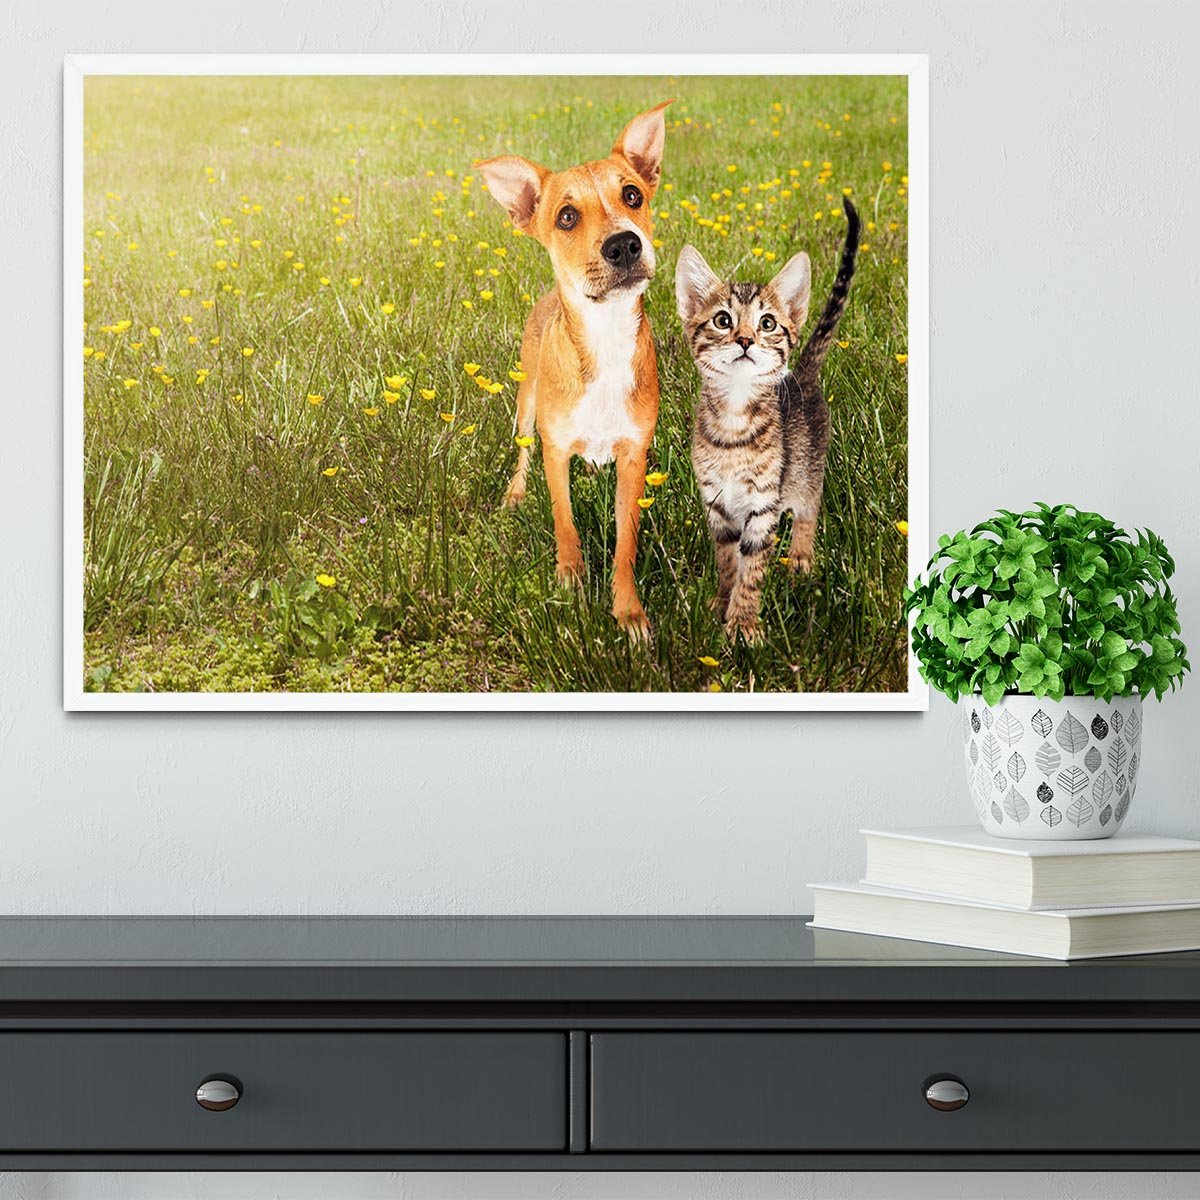 Cute kitten and puppy together in a field Framed Print - Canvas Art Rocks -6